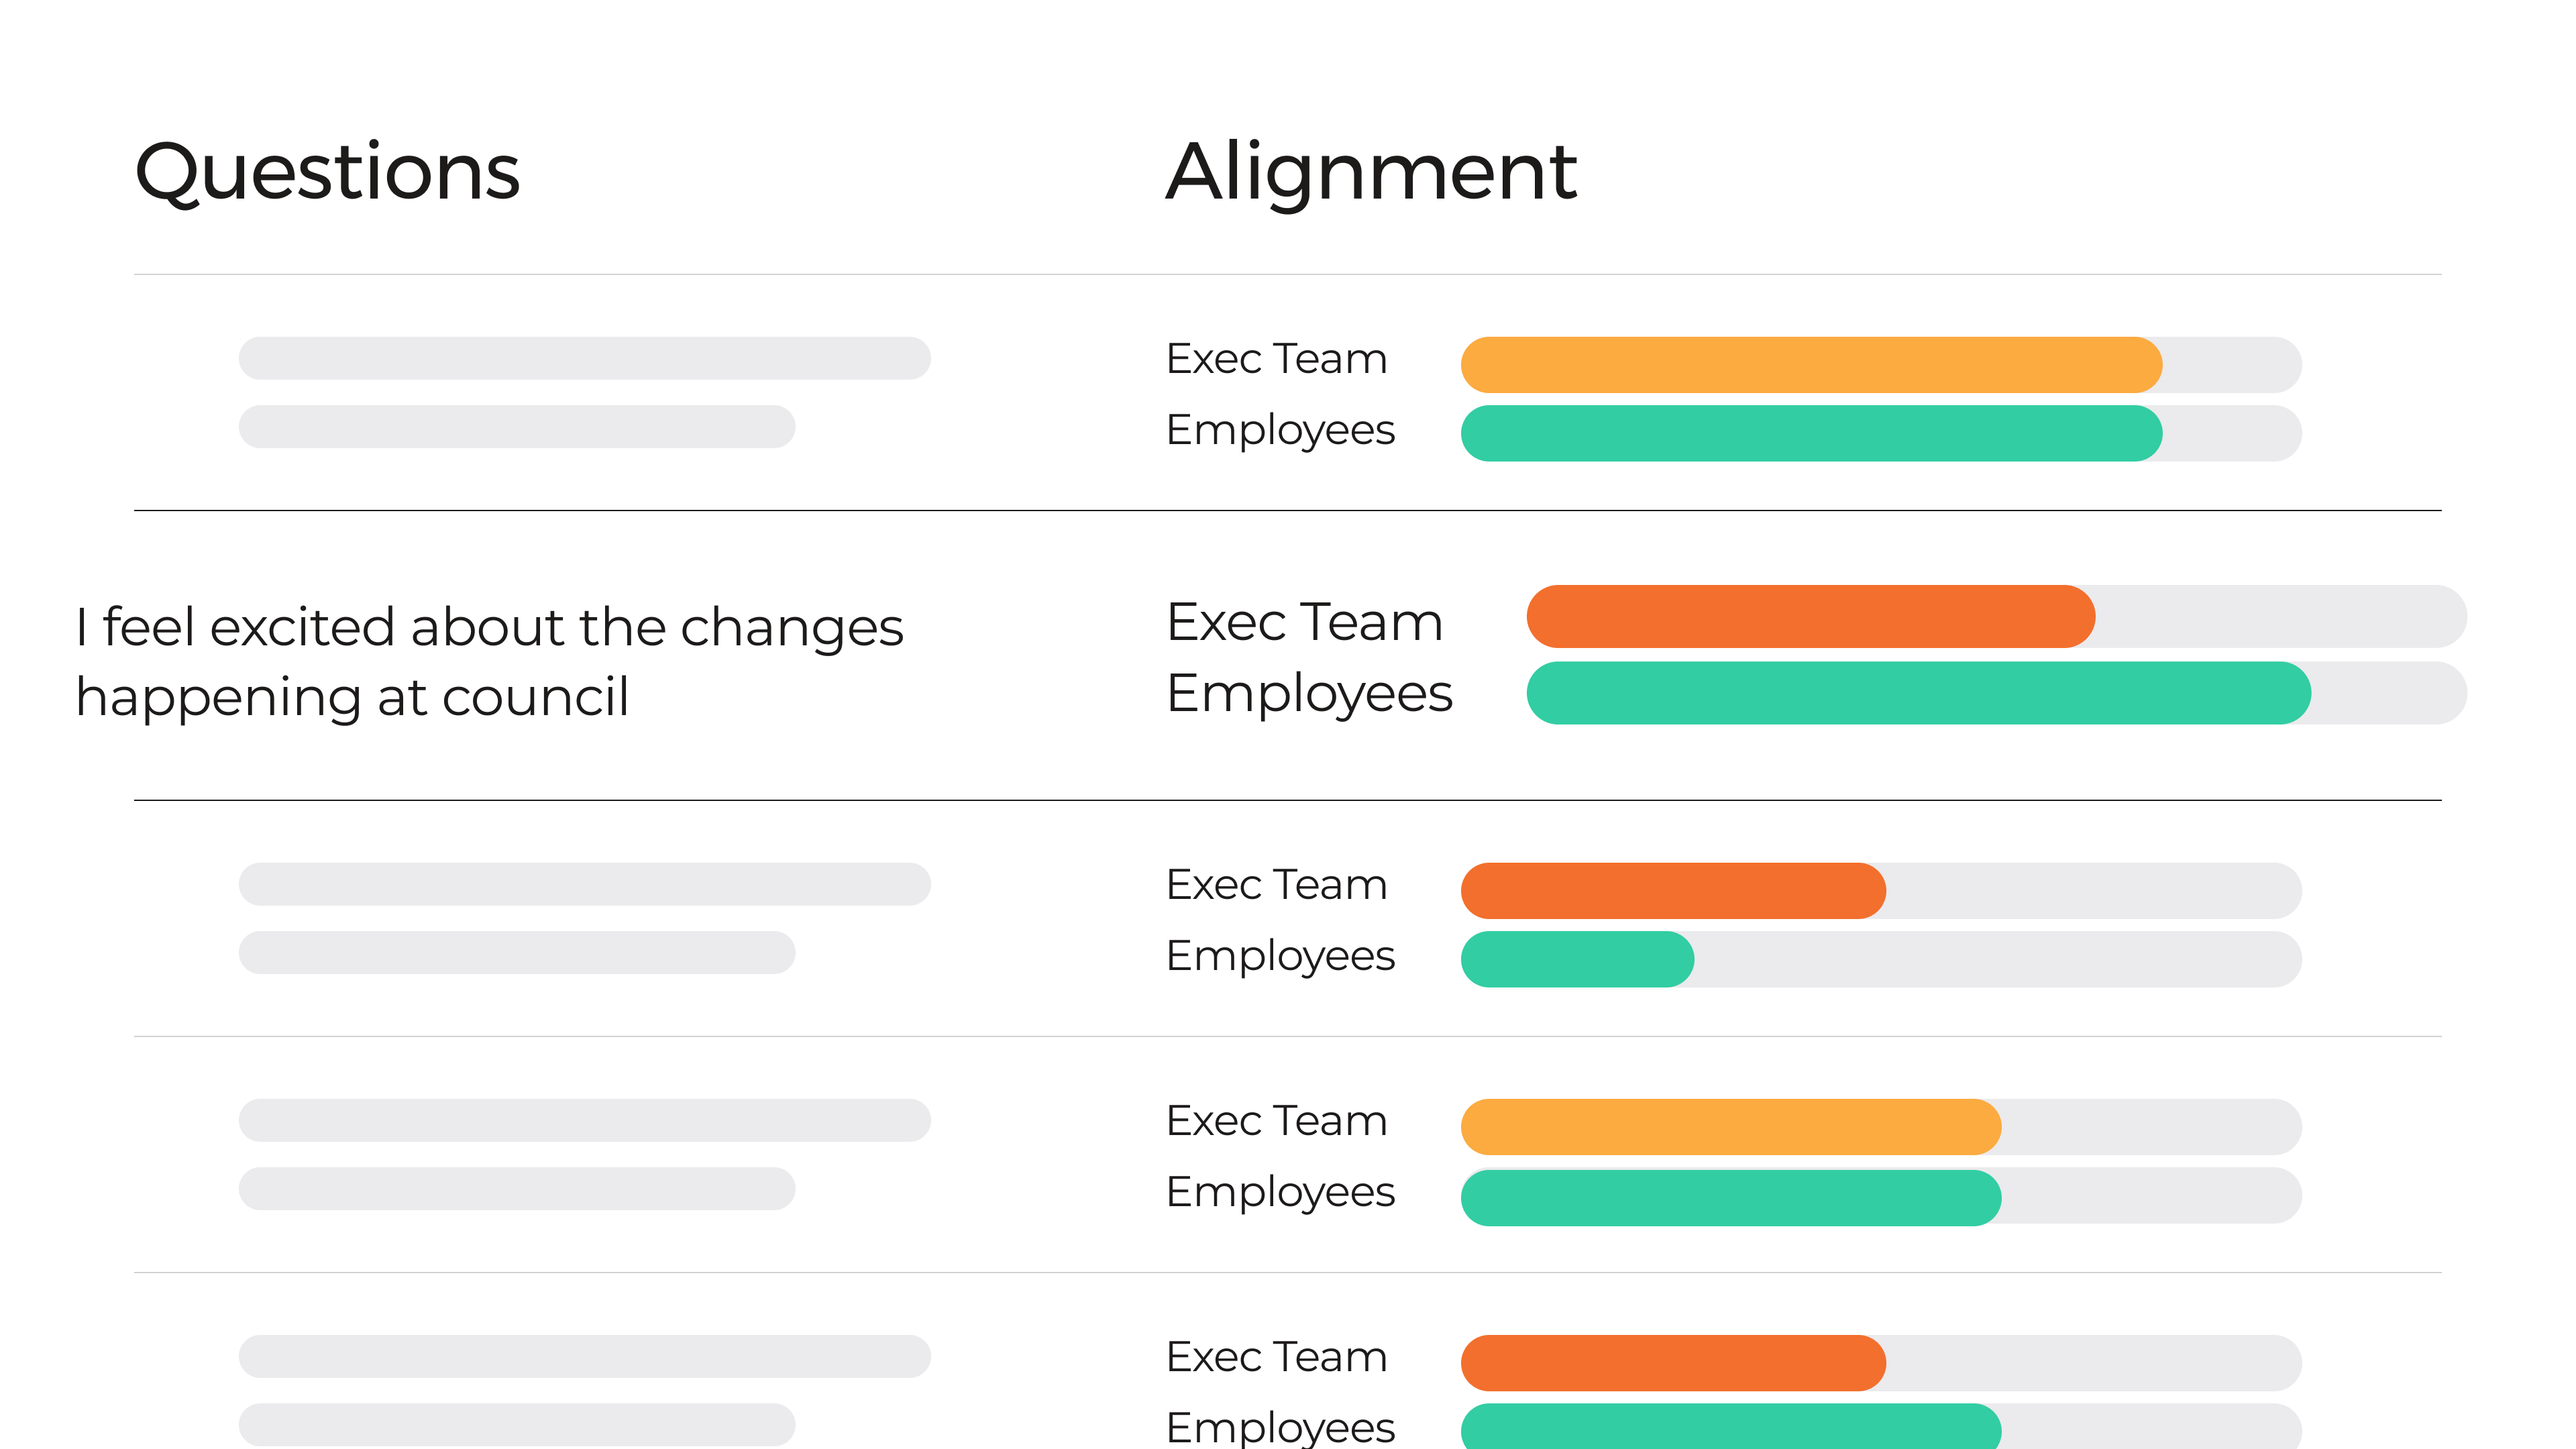 Comparing survey results between employees and the Exec team